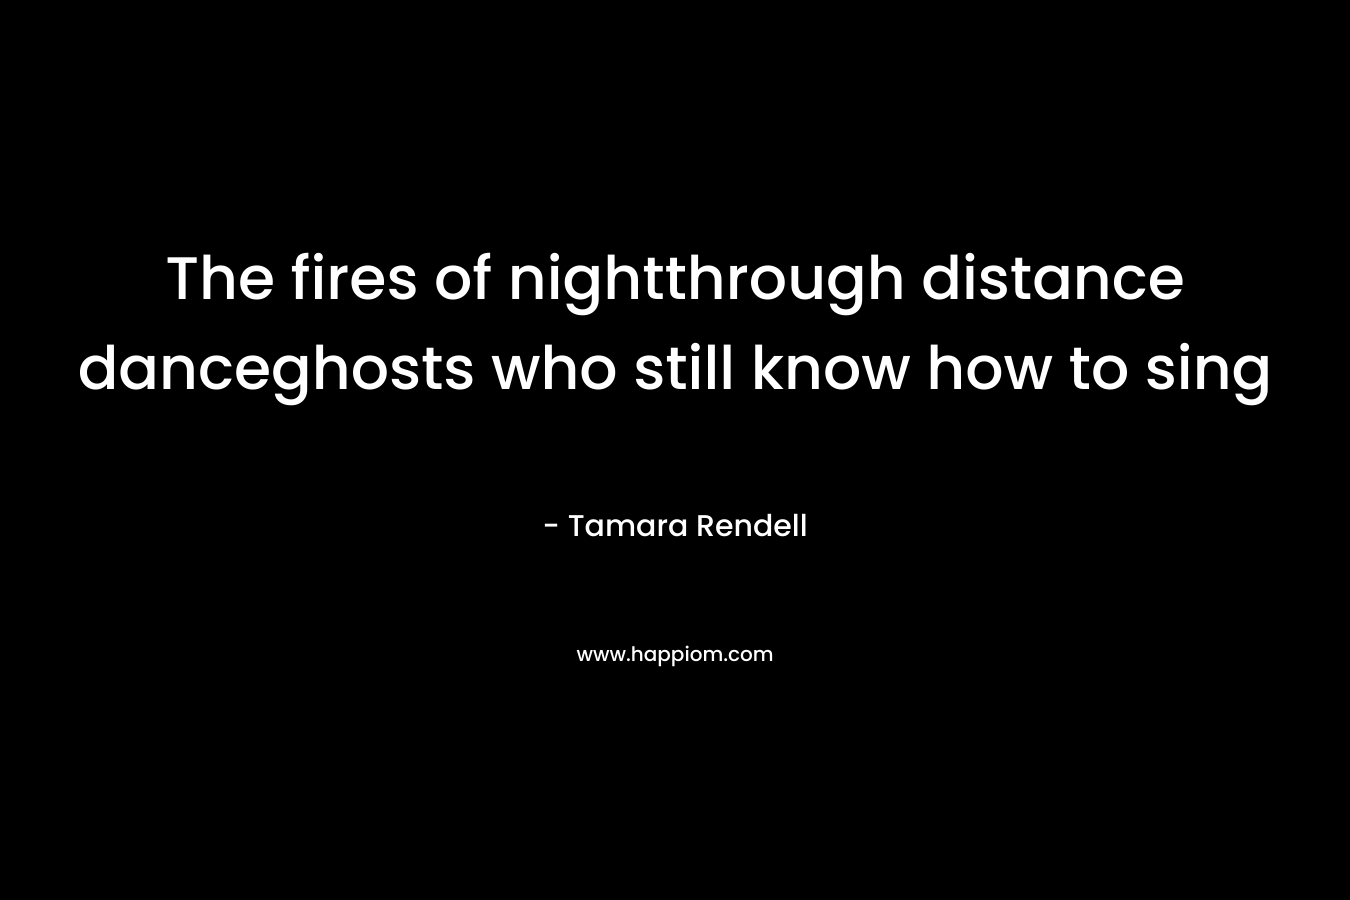 The fires of nightthrough distance danceghosts who still know how to sing – Tamara Rendell